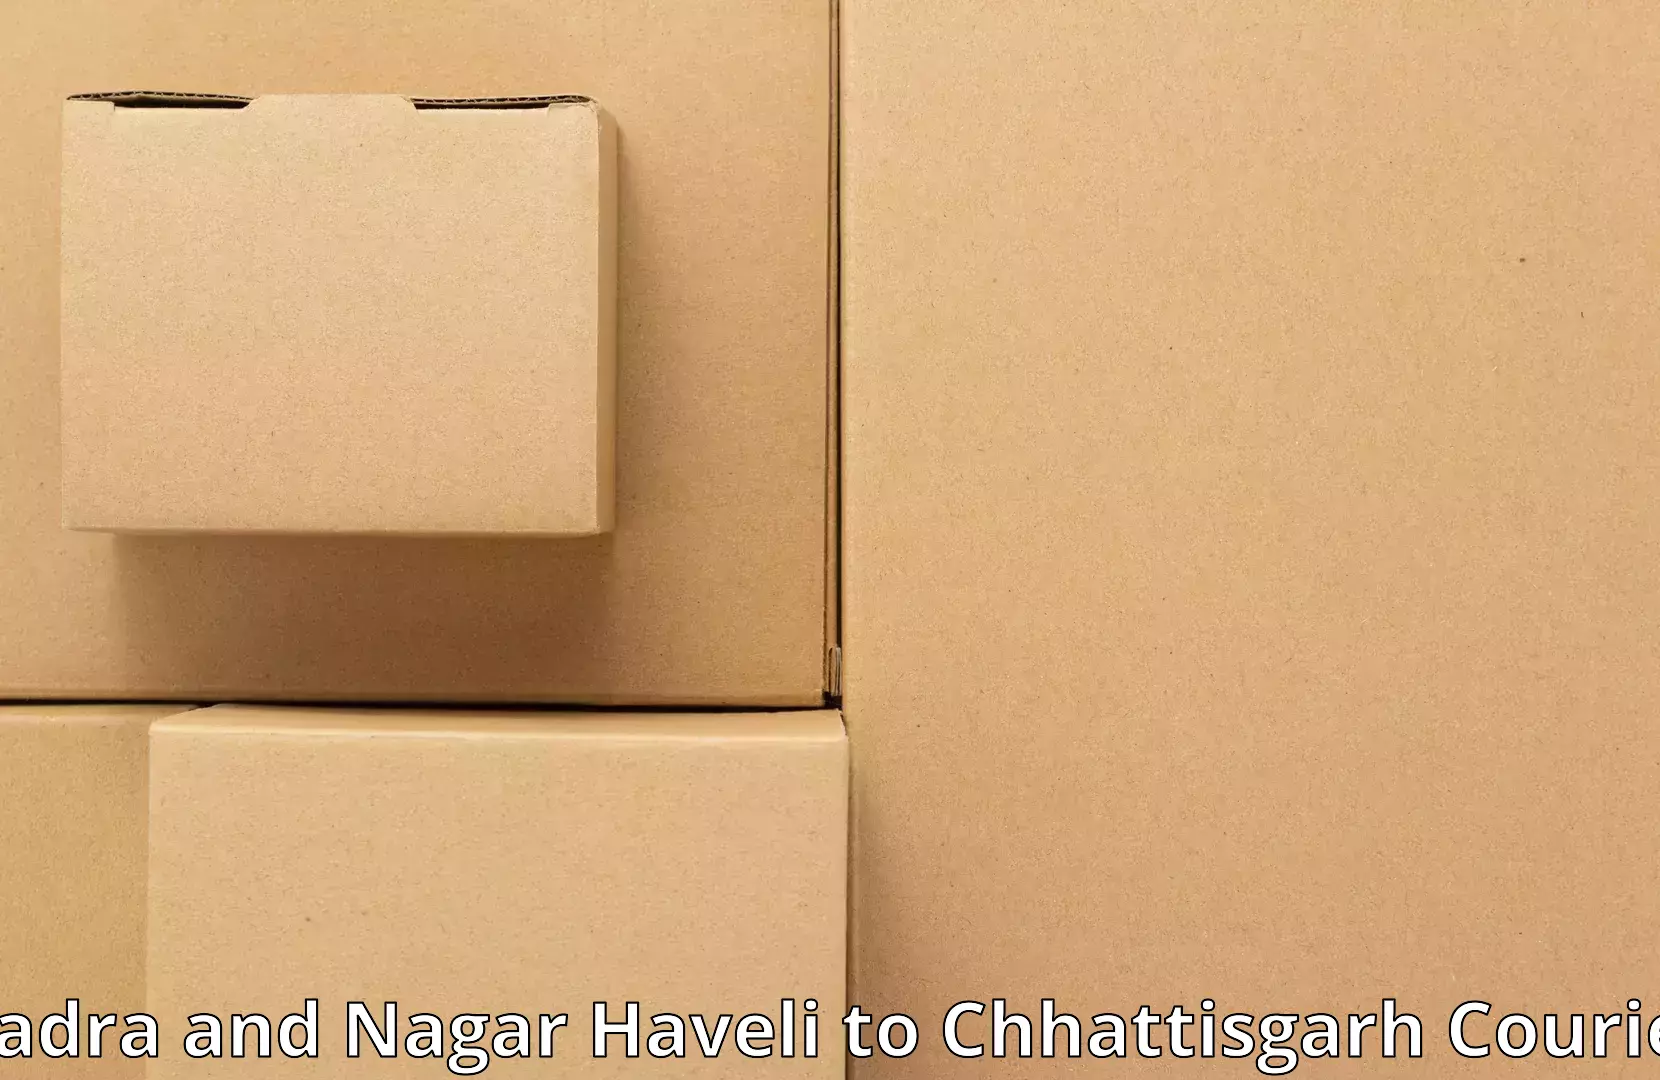 Nationwide household movers in Dadra and Nagar Haveli to Raigarh